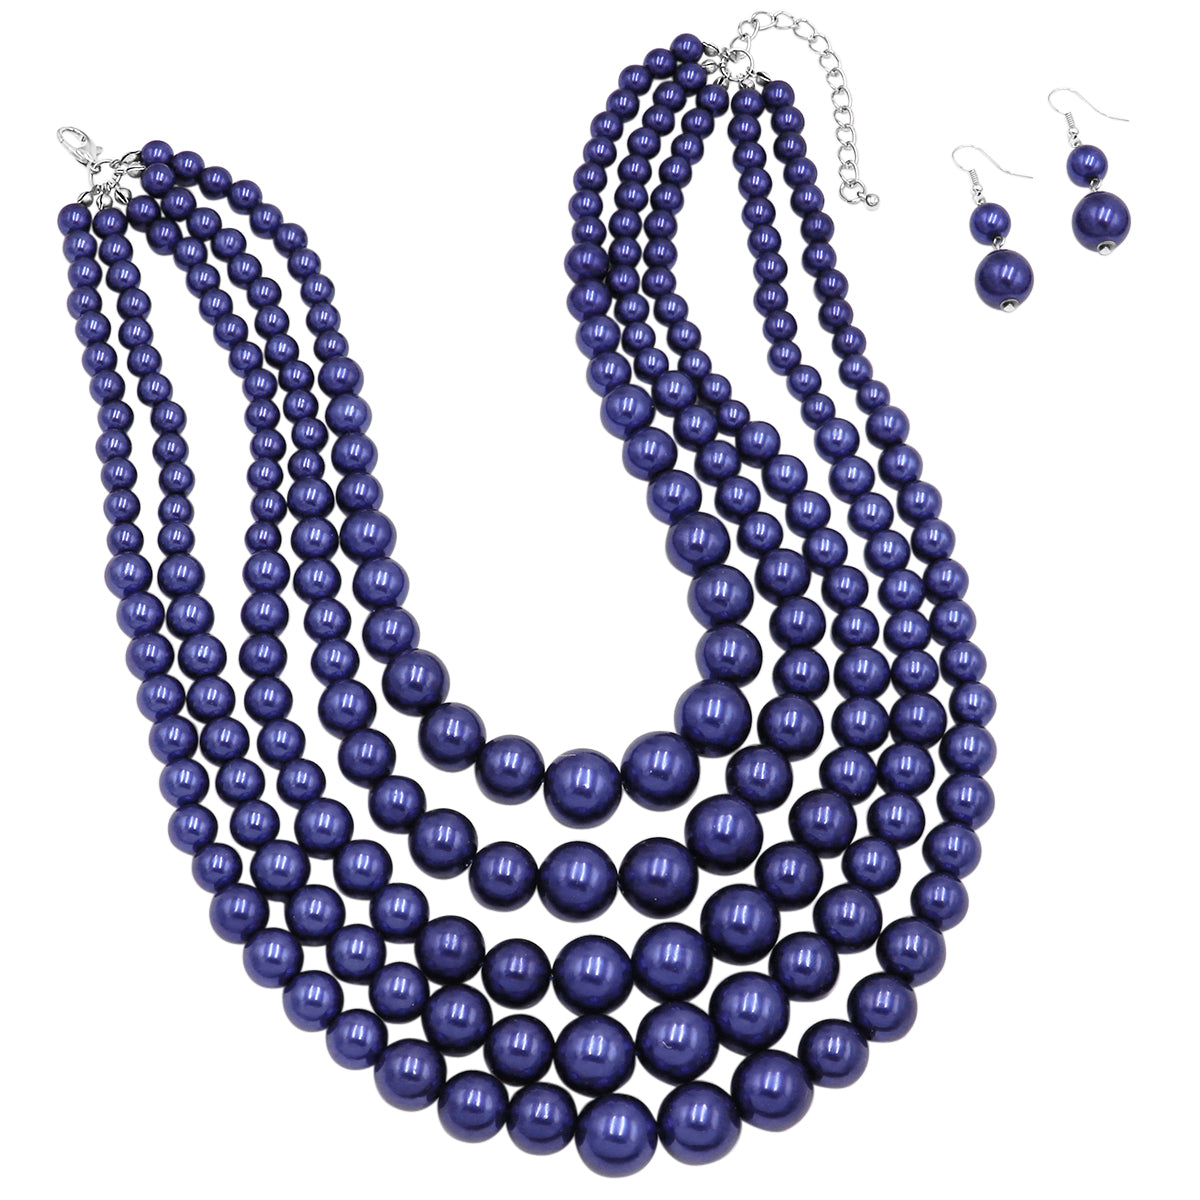 5 Colorful Multi Strands Simulated Pearl Bib Necklace And Earrings Jewelry Set, 16"+3" Extender